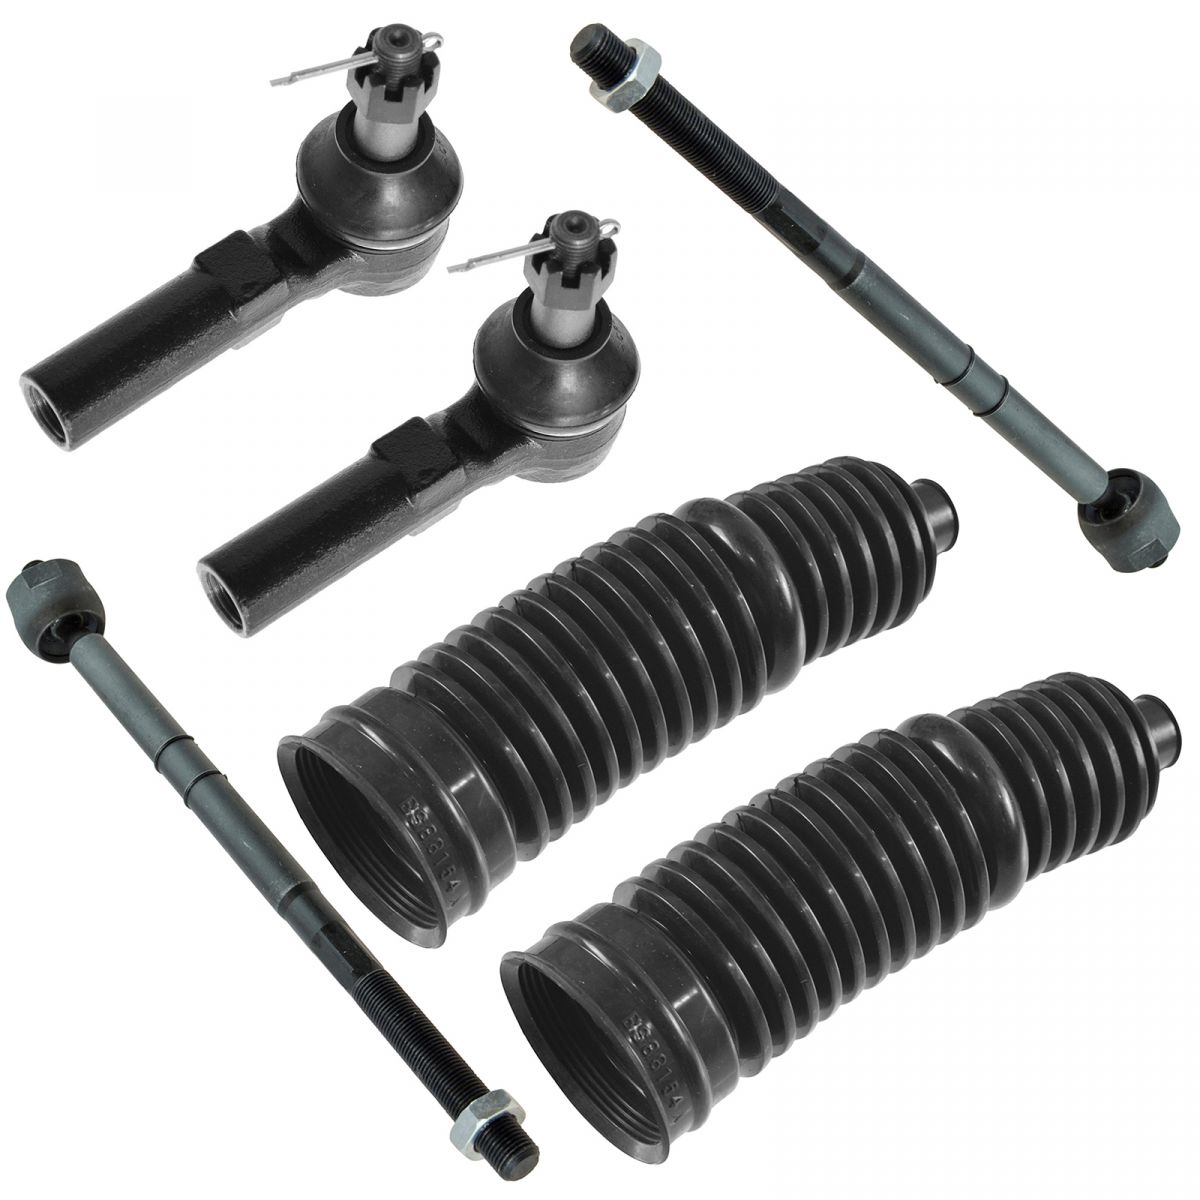 4 Piece Inner Tie Rods /& Steering Rack Bellows Boots for Ford Mercury Mazda New